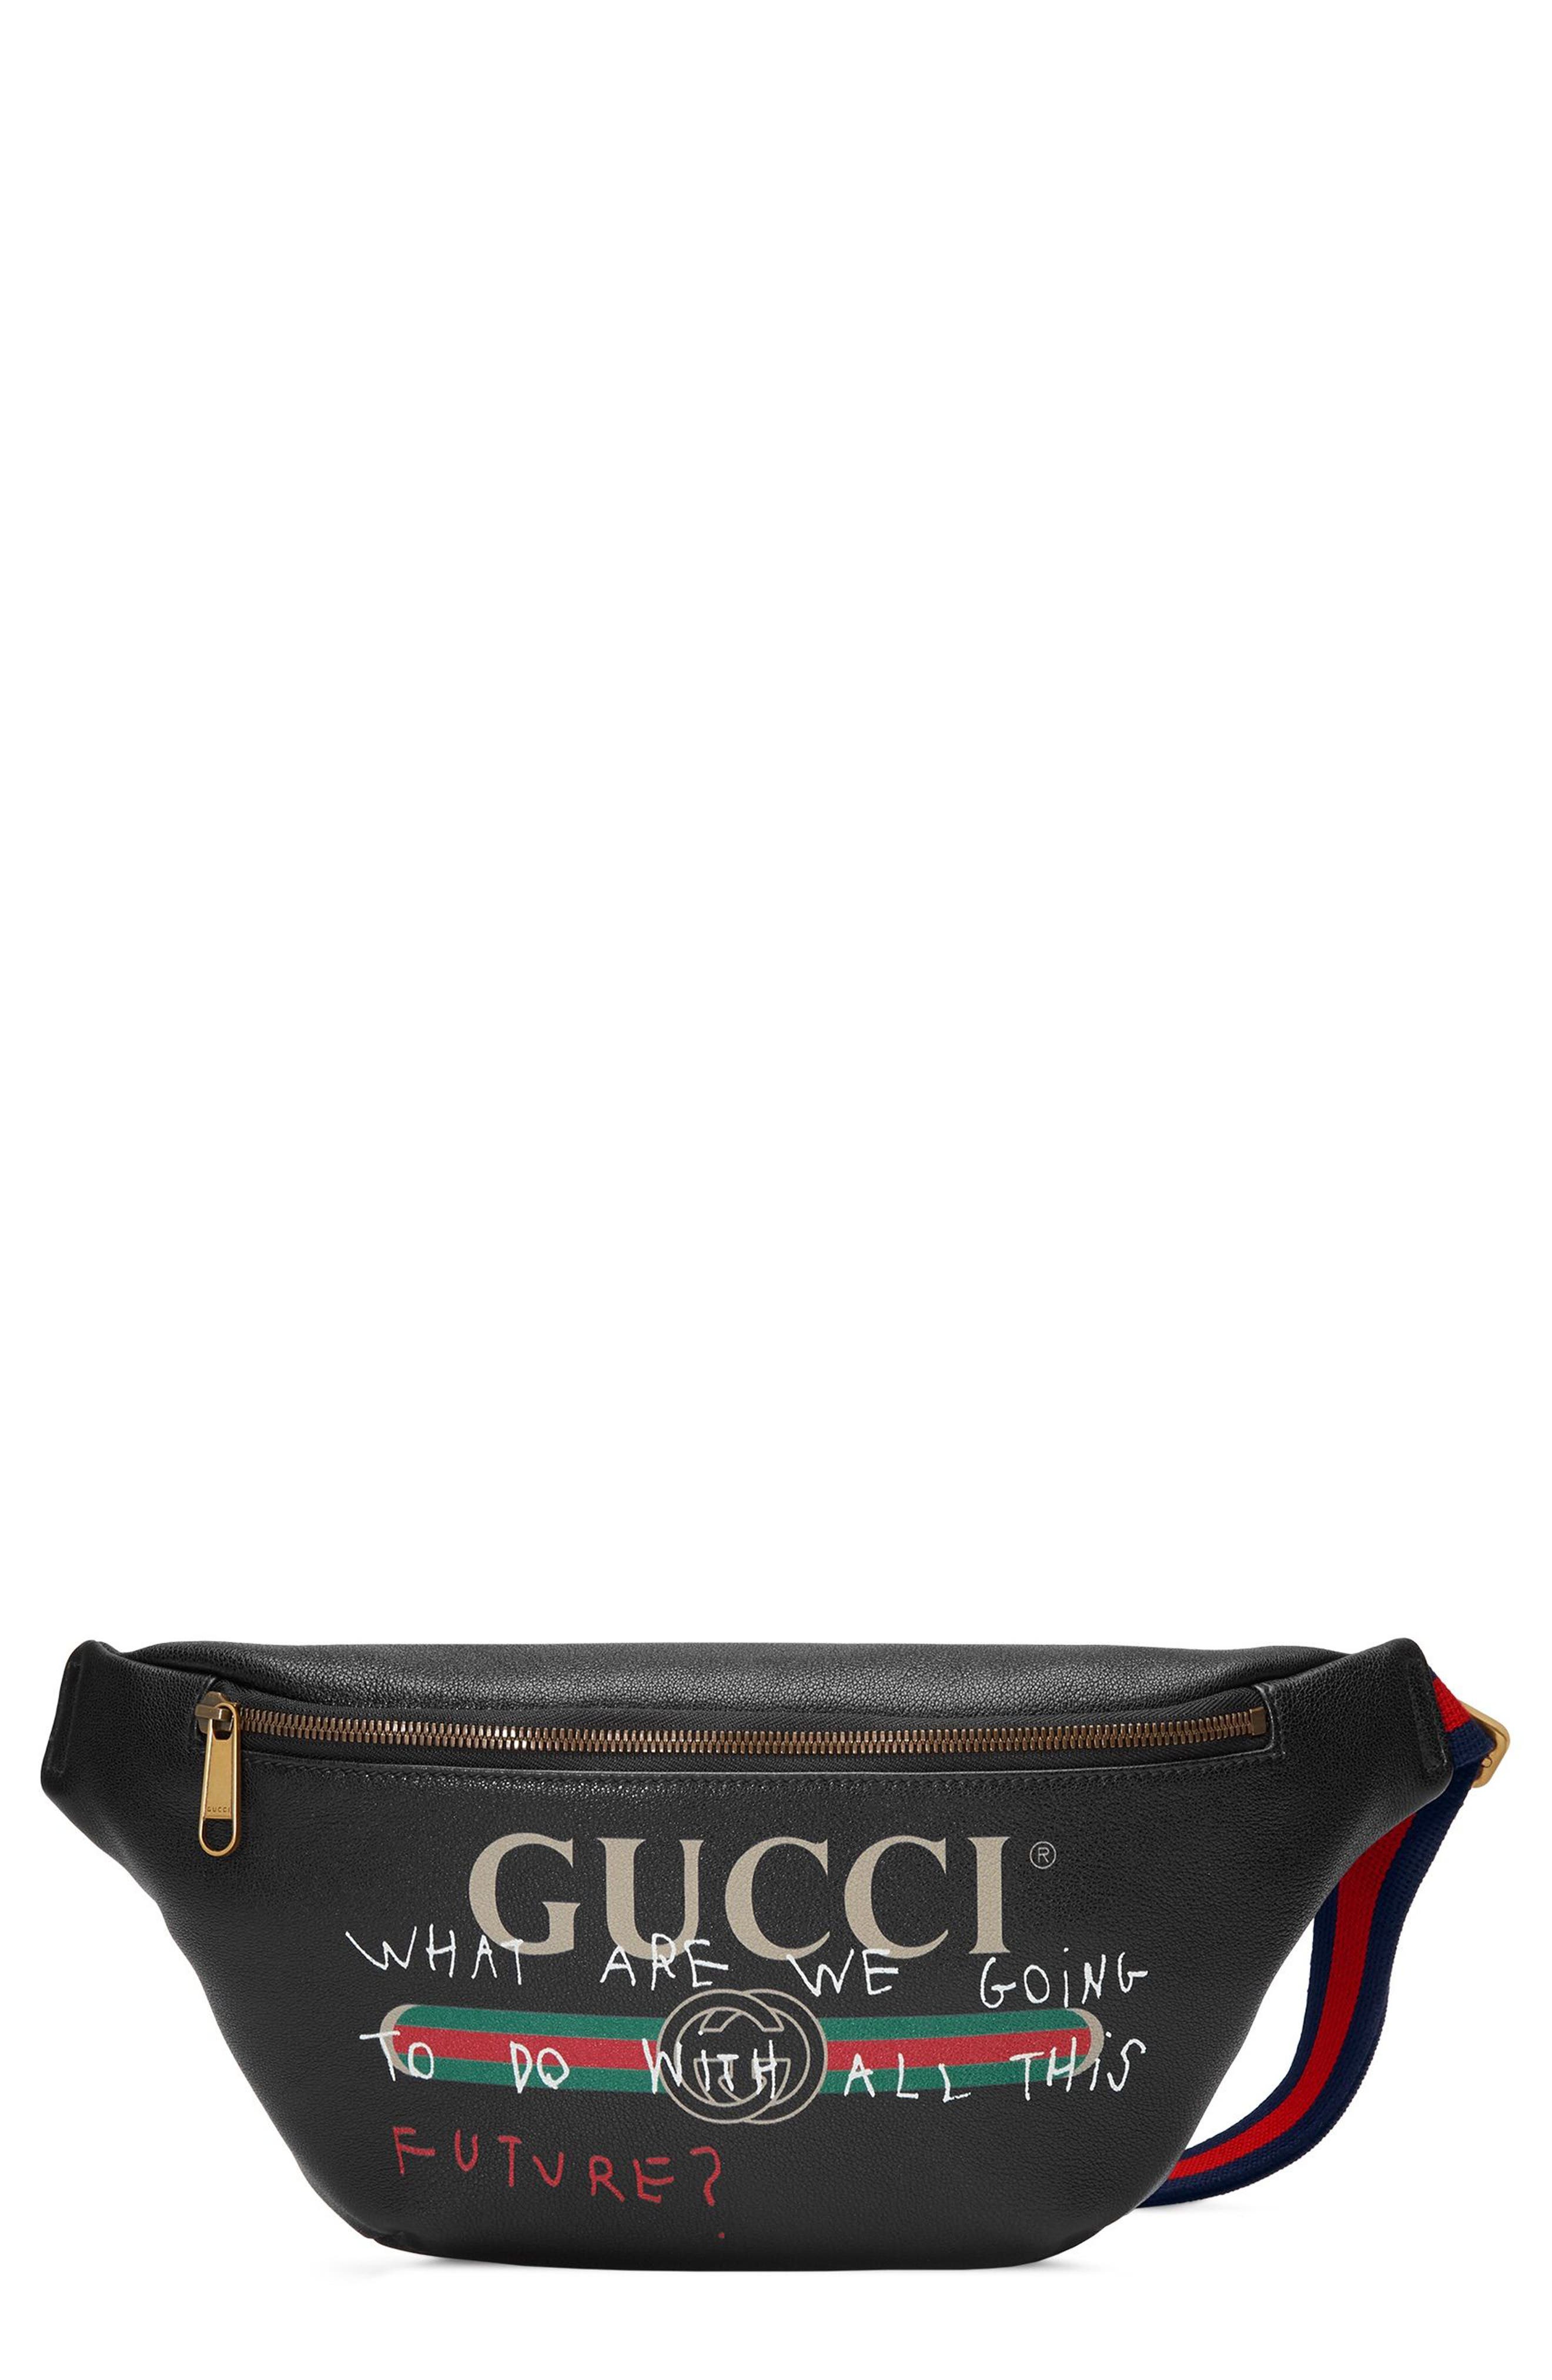 mens gucci fanny pack, OFF 77%,www 